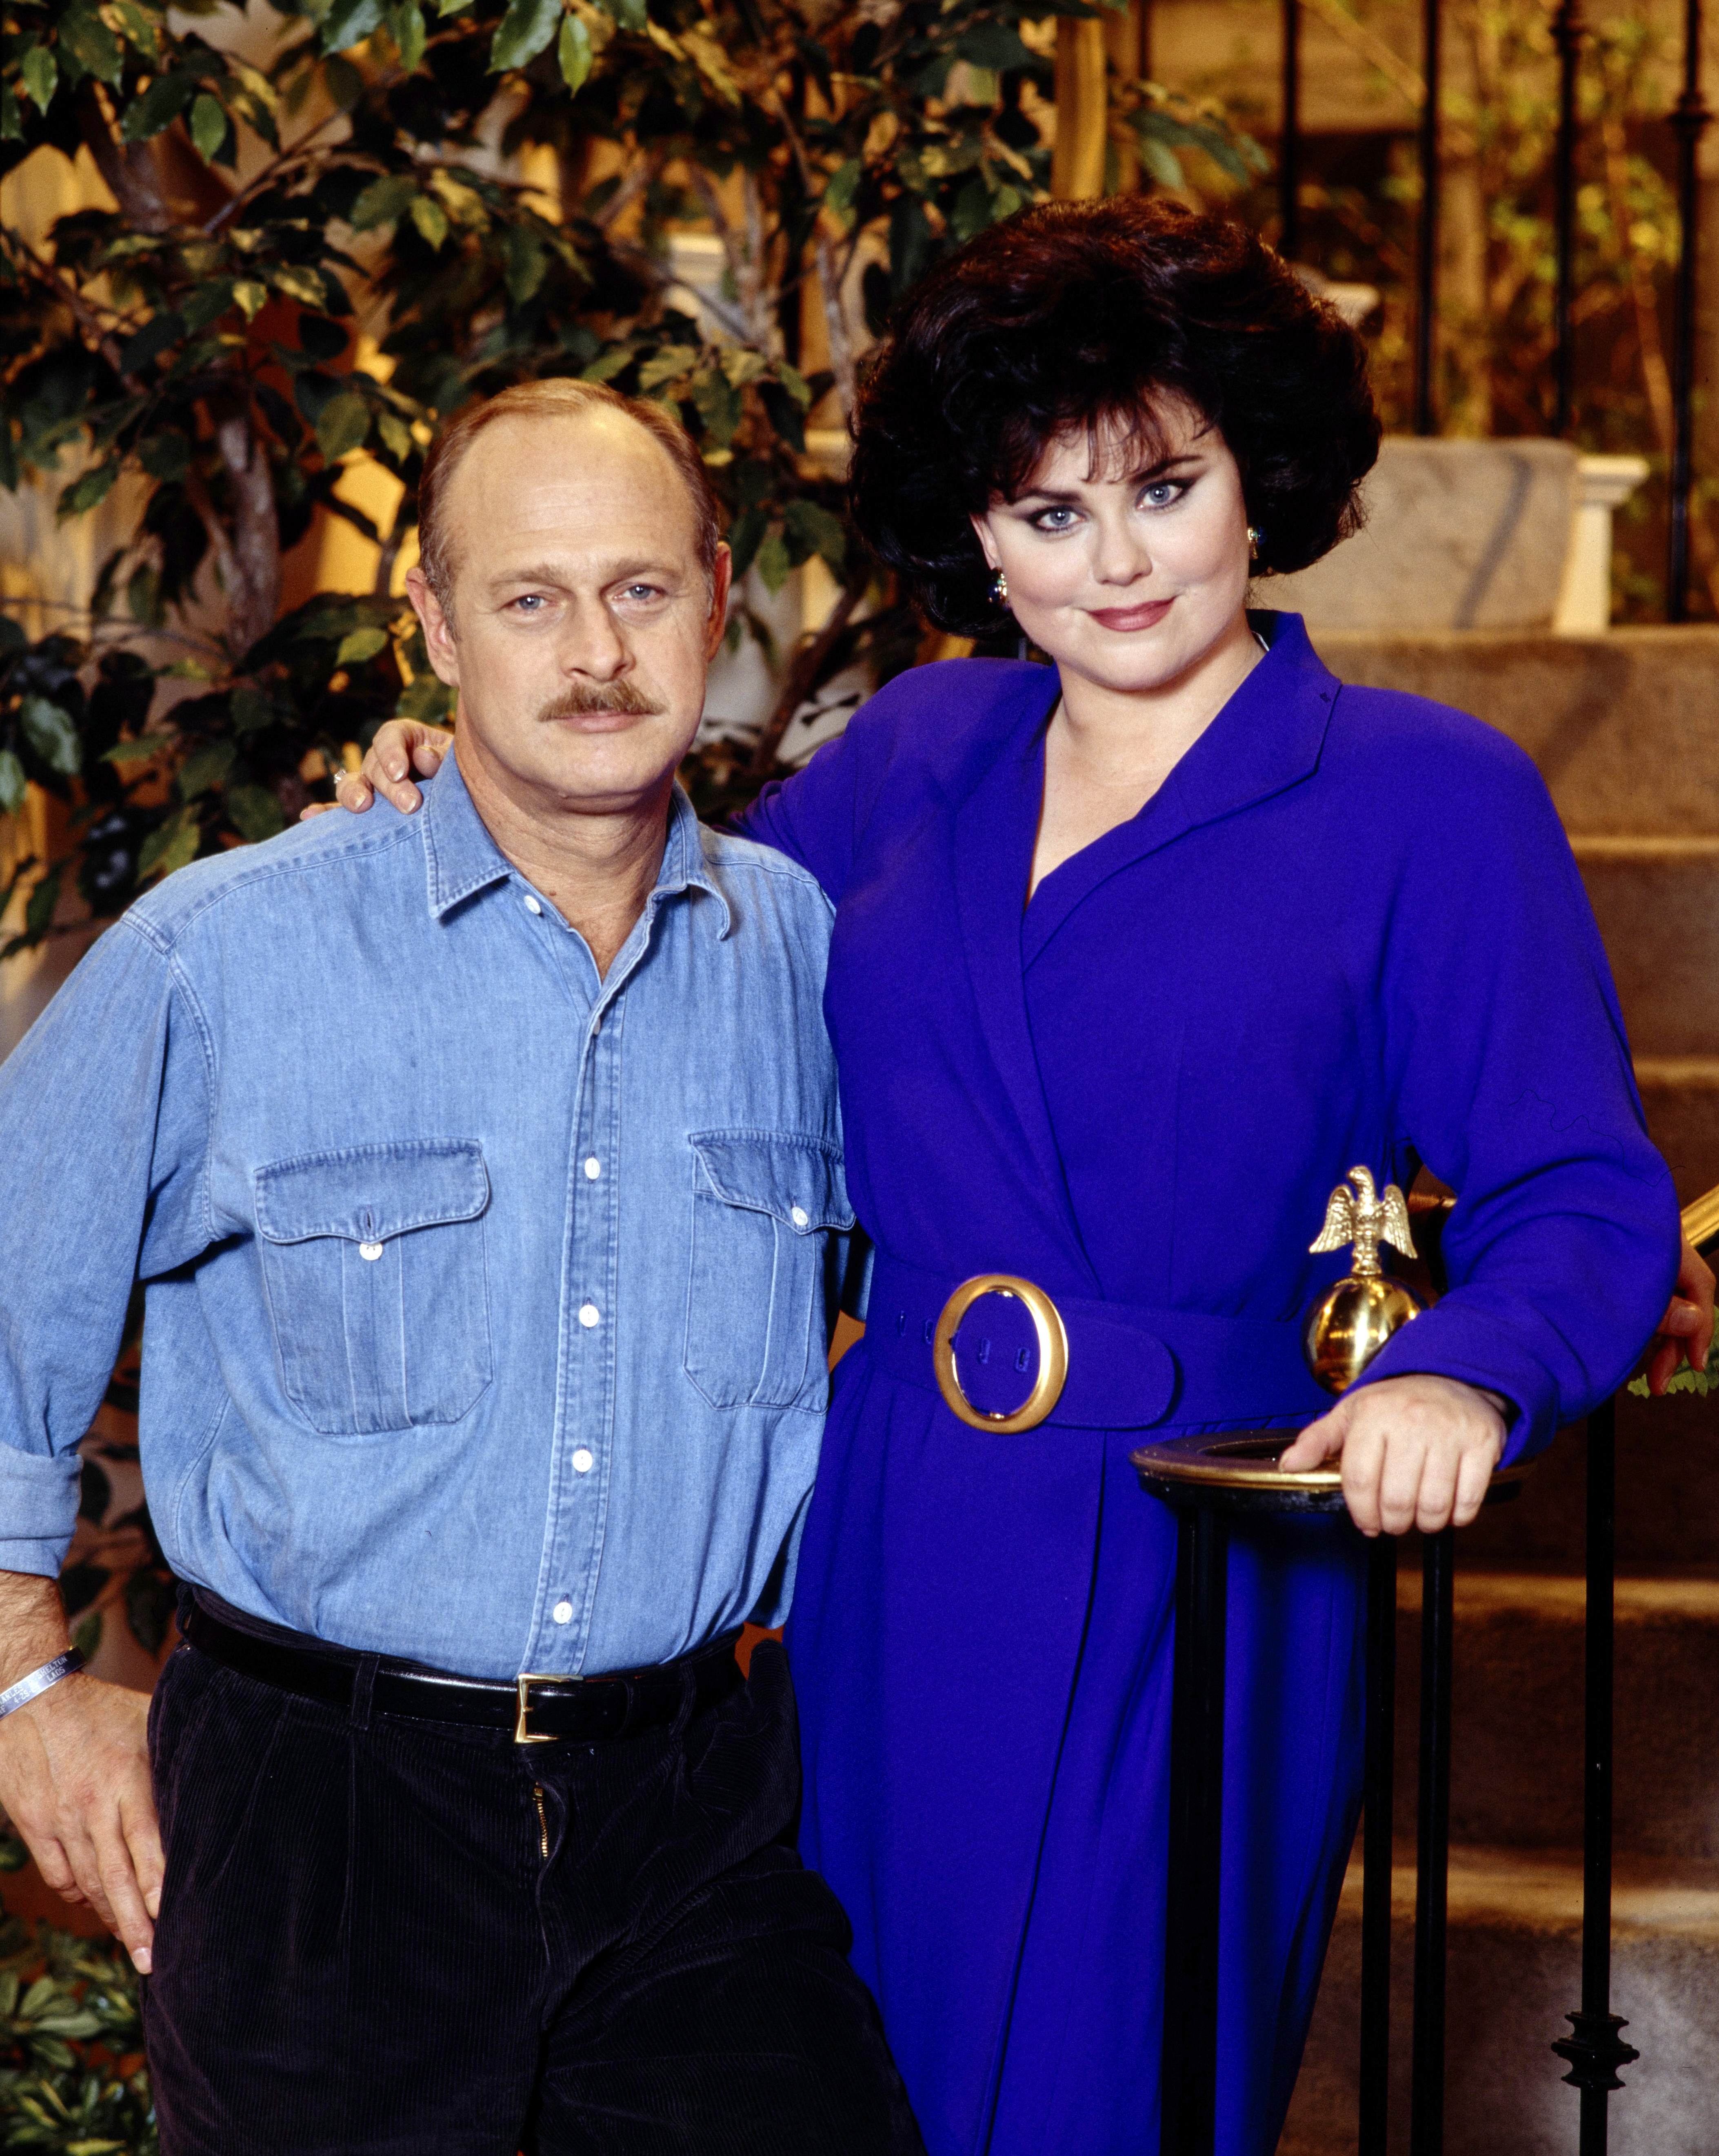 Gerald McRaney as Dash Goff and Delta Burke as Suzanne Sugarbaker in the television show "Women of the House" on January 4, 1995 | Source: Getty Images